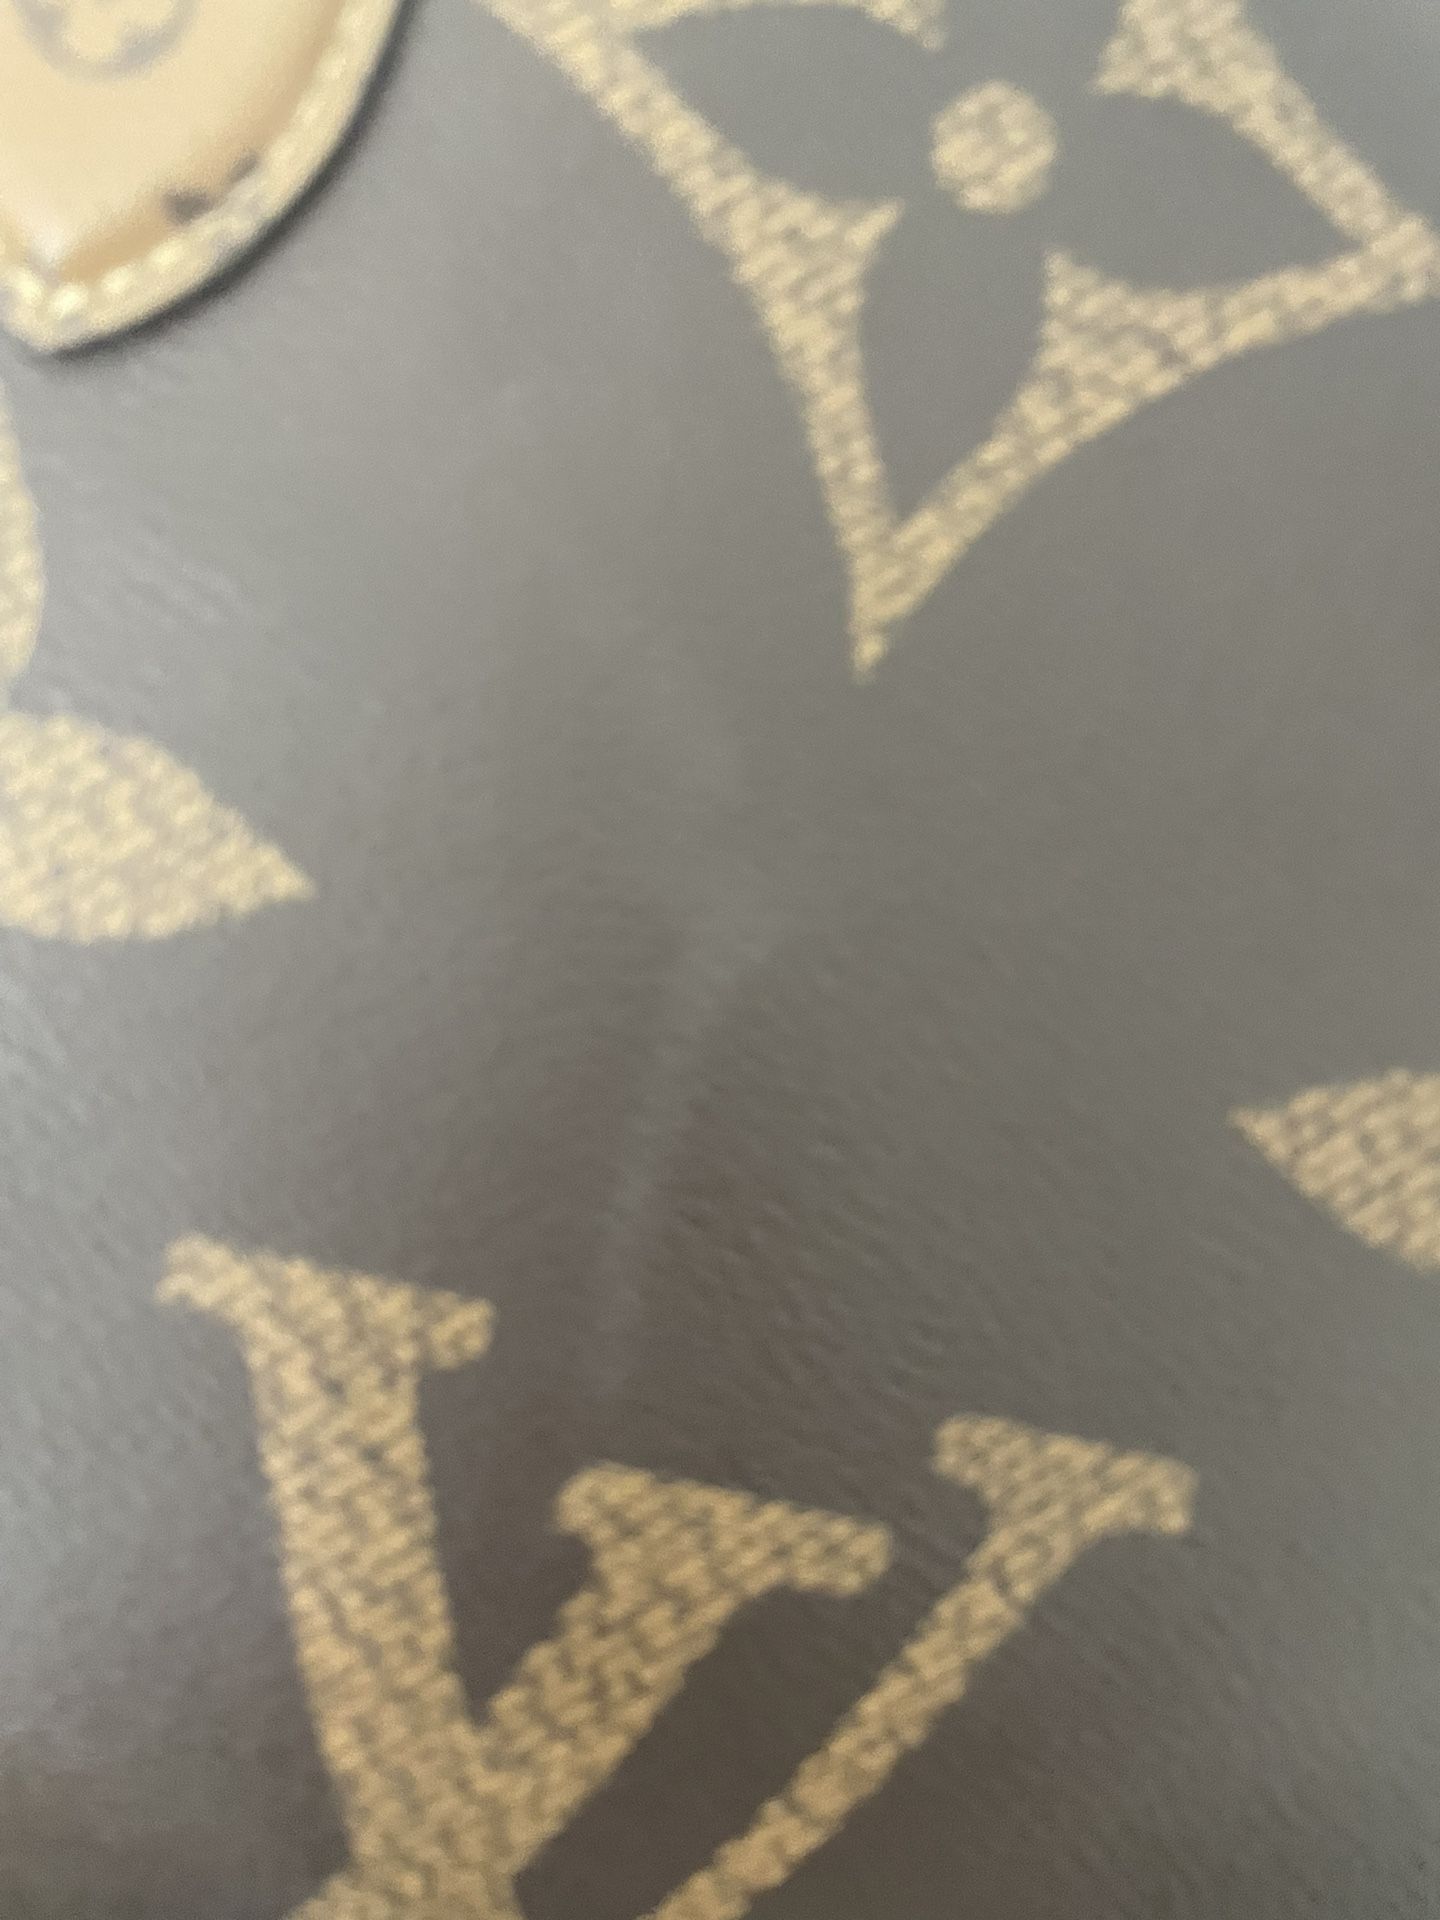 Louis Vuitton Hudson PM Monogram Canvas Bag for Sale in Moreno Valley, CA -  OfferUp